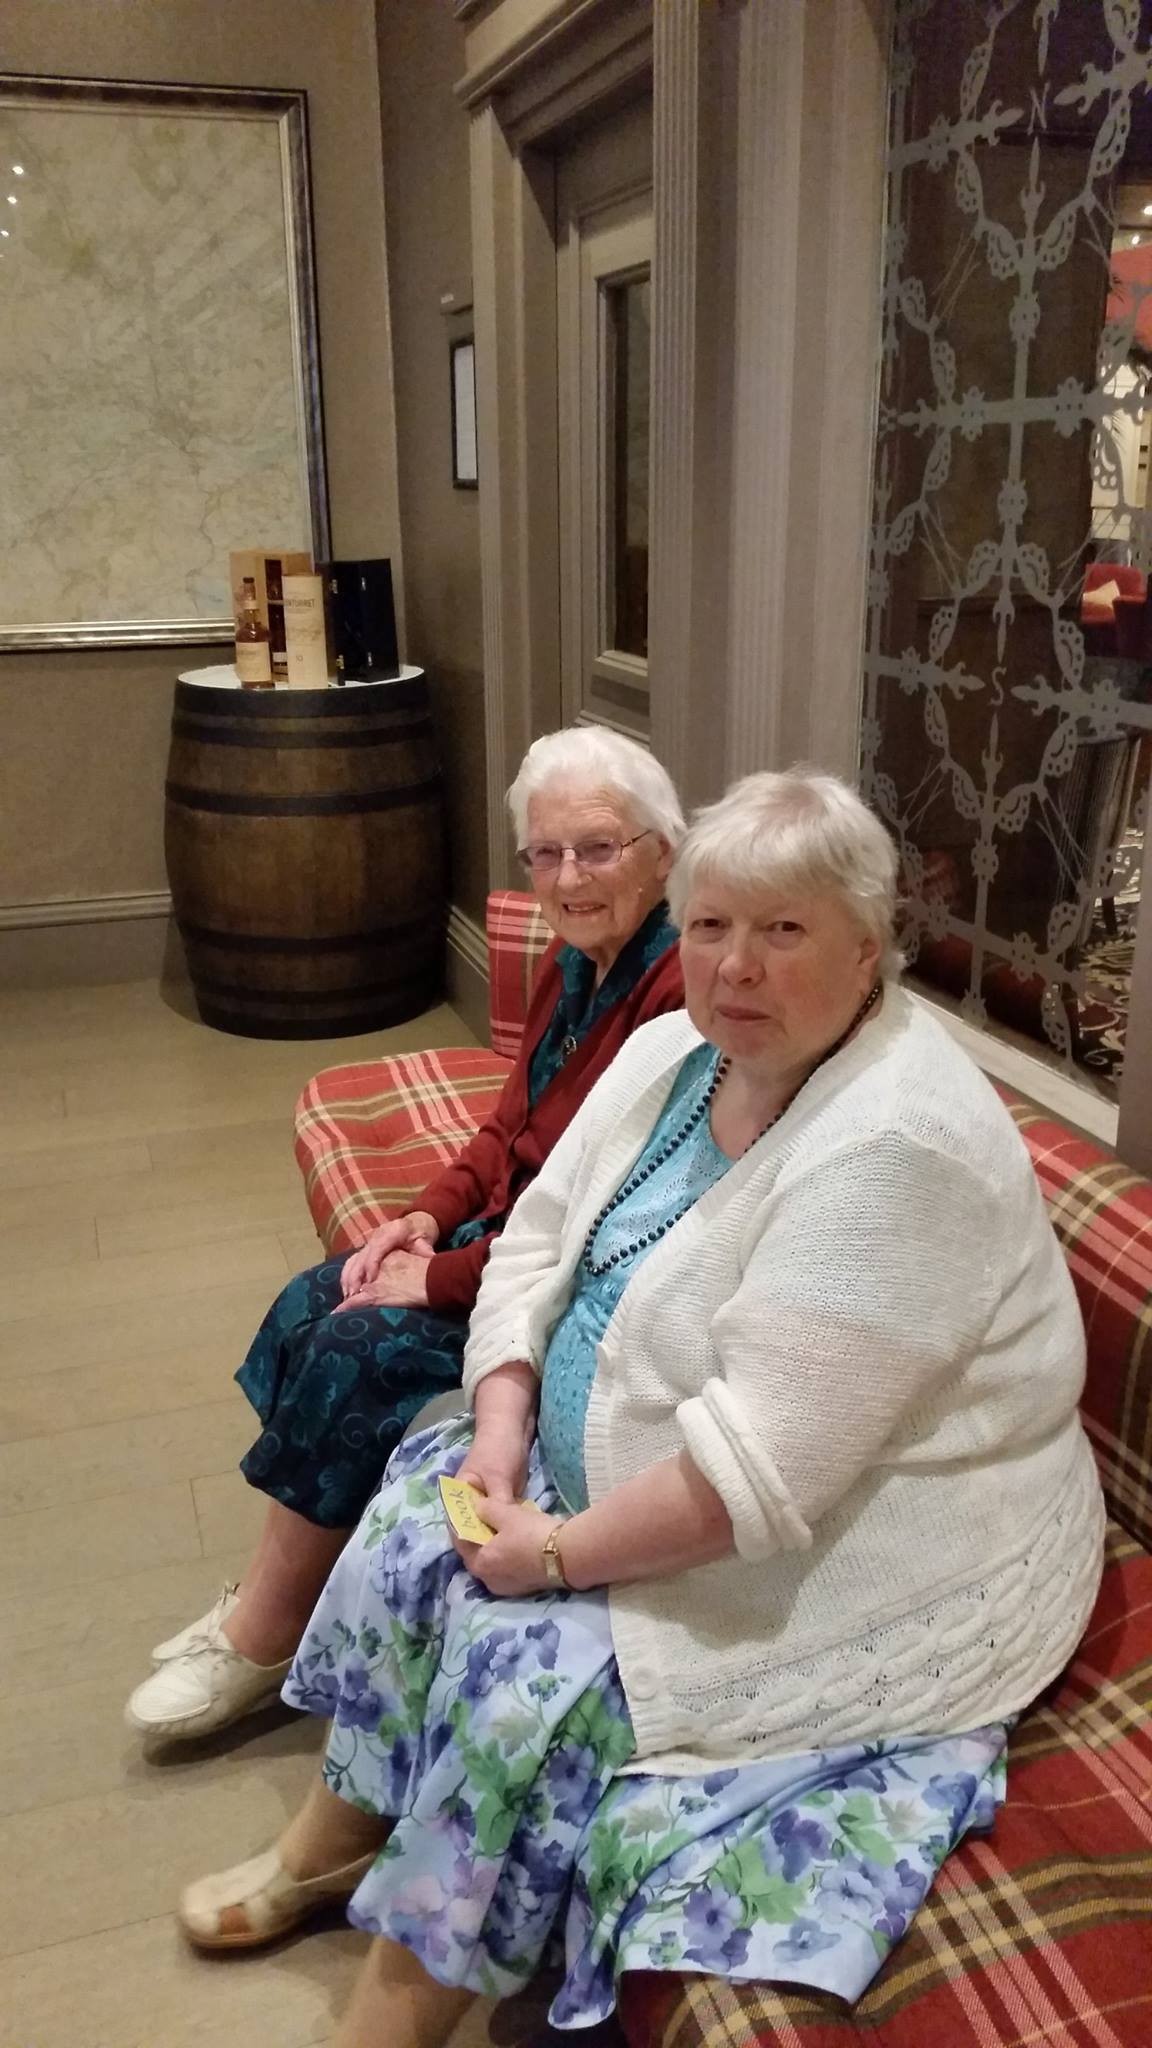 Adult Carer and cared-for enjoying a break at Crieff Hydro